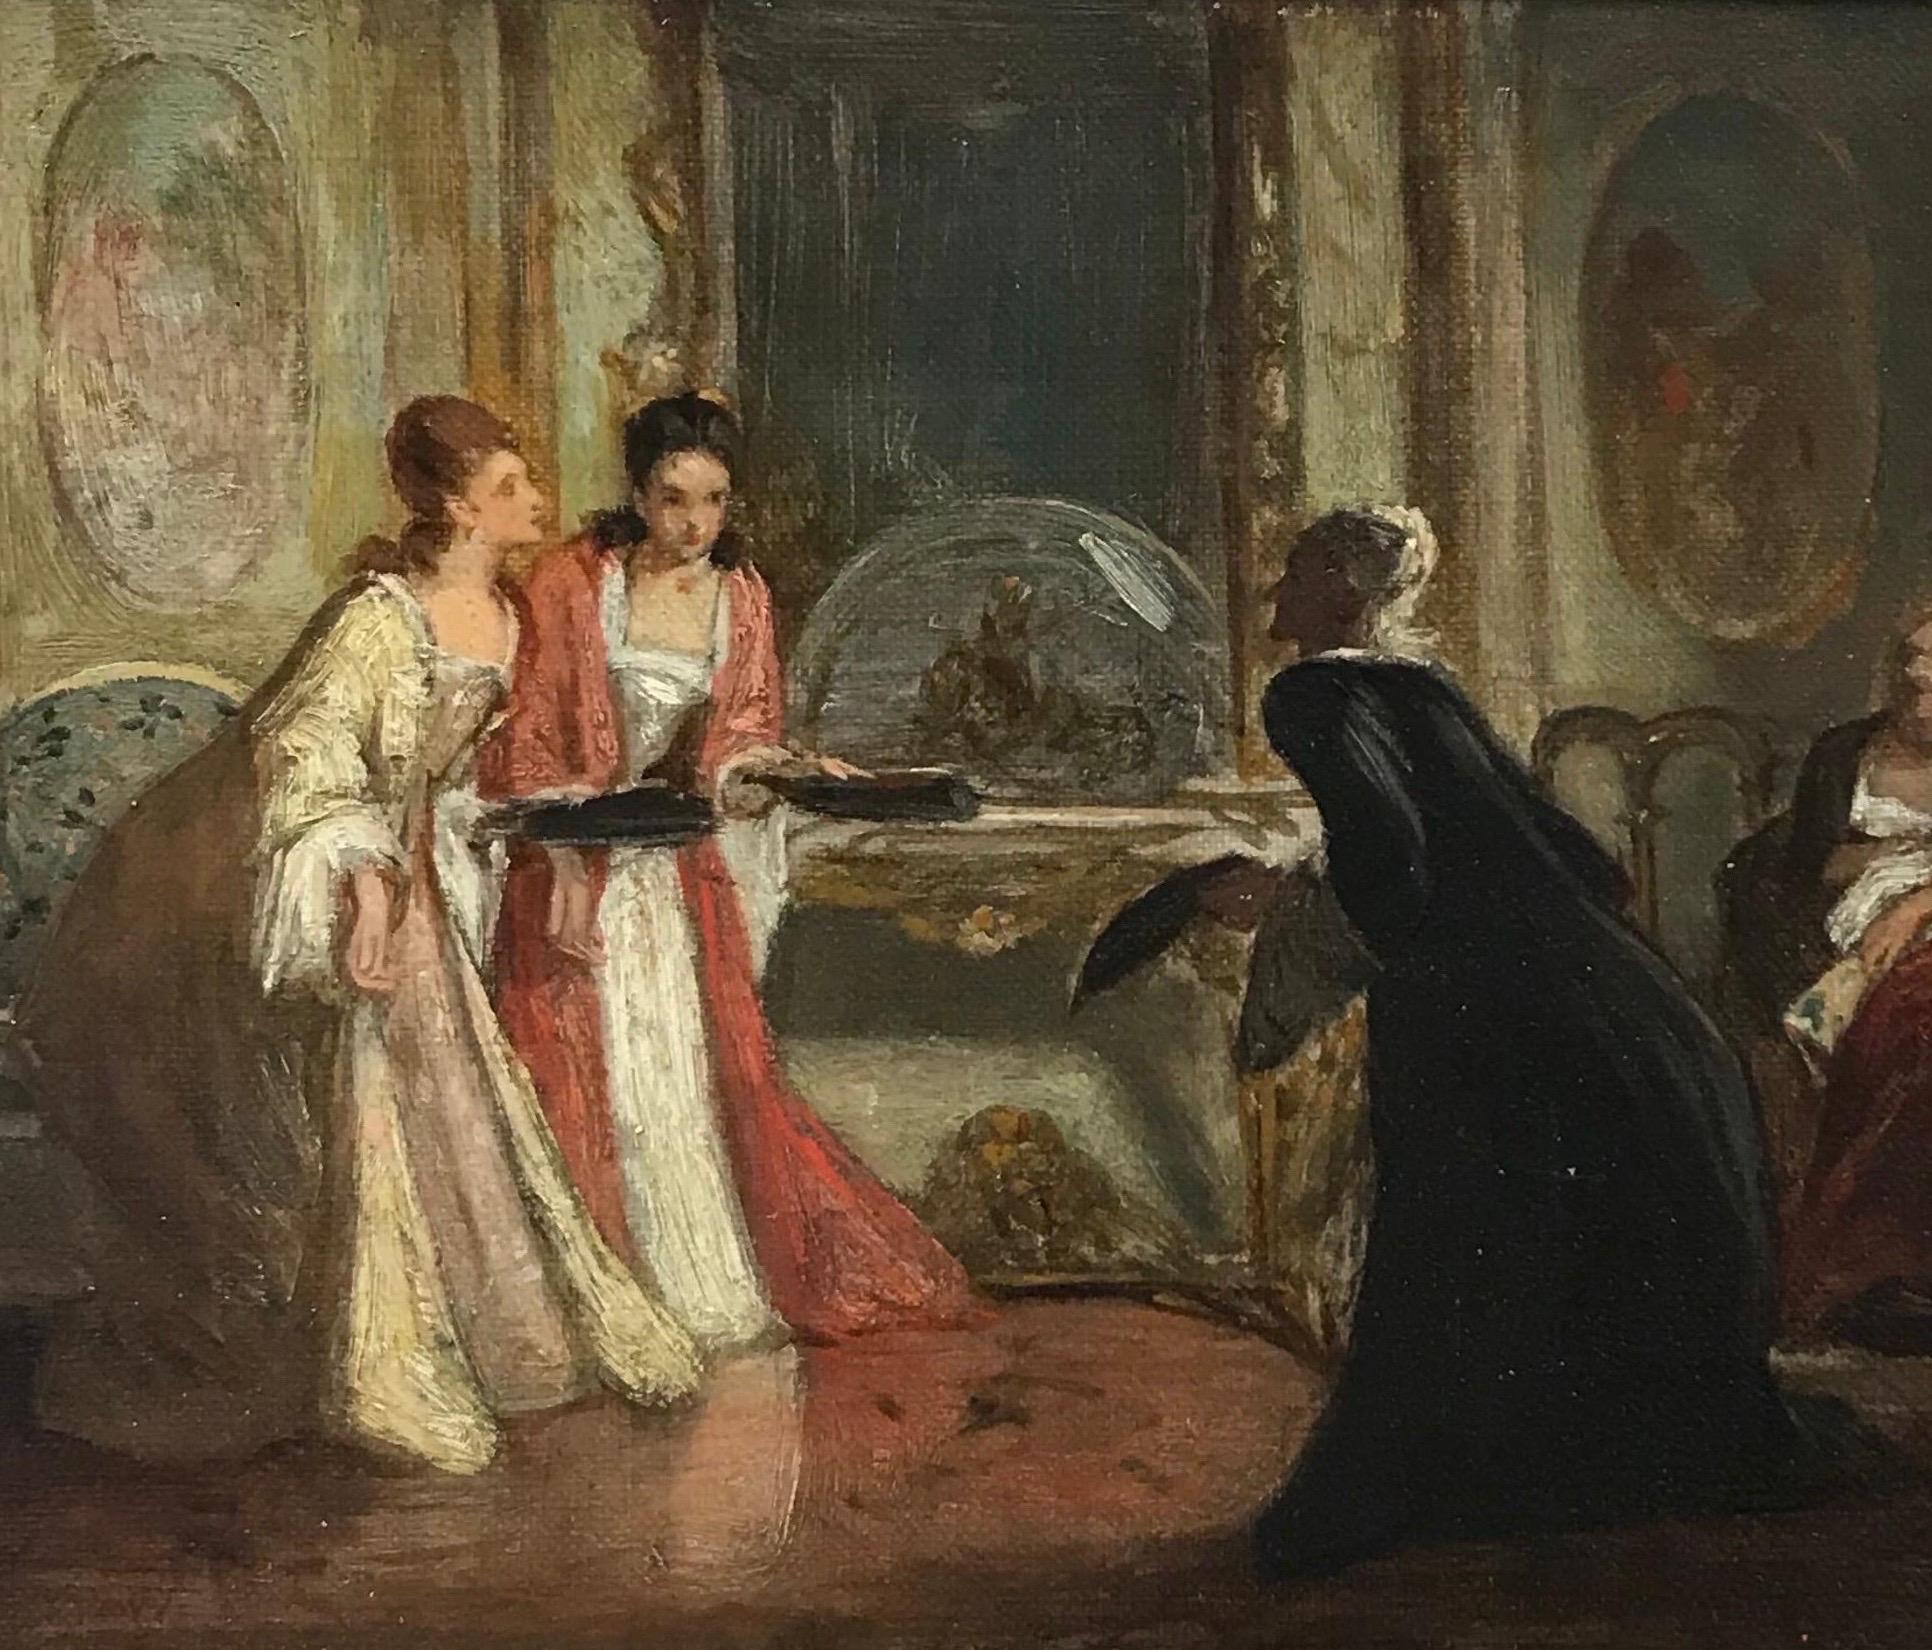 Artist/ School: David Wilkie Wynfield, (British 1837-1887)

Title: Elegant Ladies in a Drawing Room interior scene

Medium: oil on panel, framed

Framed: 12 x 16 inches
Board: 7.25 x 11 inches

Provenance: private collection, England

Condition: The